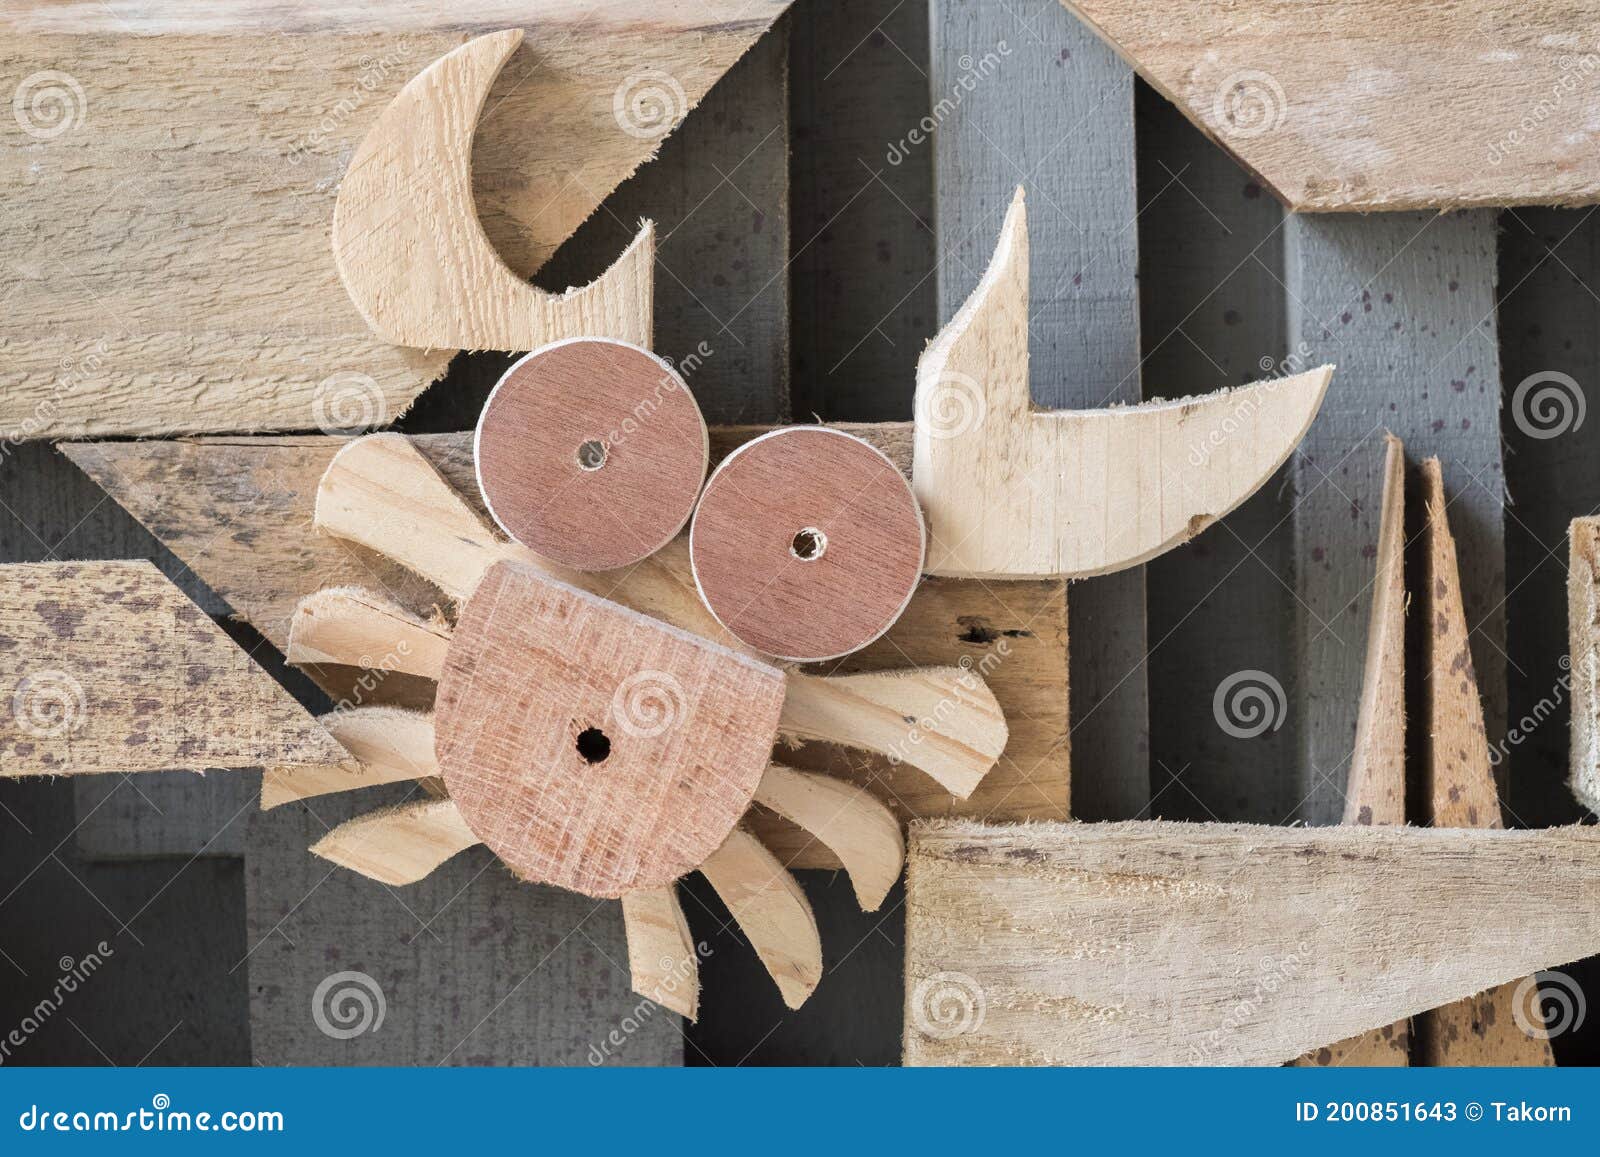 Home Decorations Made of Wood are Aquatic Animals, Simple and Beautiful  Patterns. Stock Image - Image of handmade, natural: 200851643